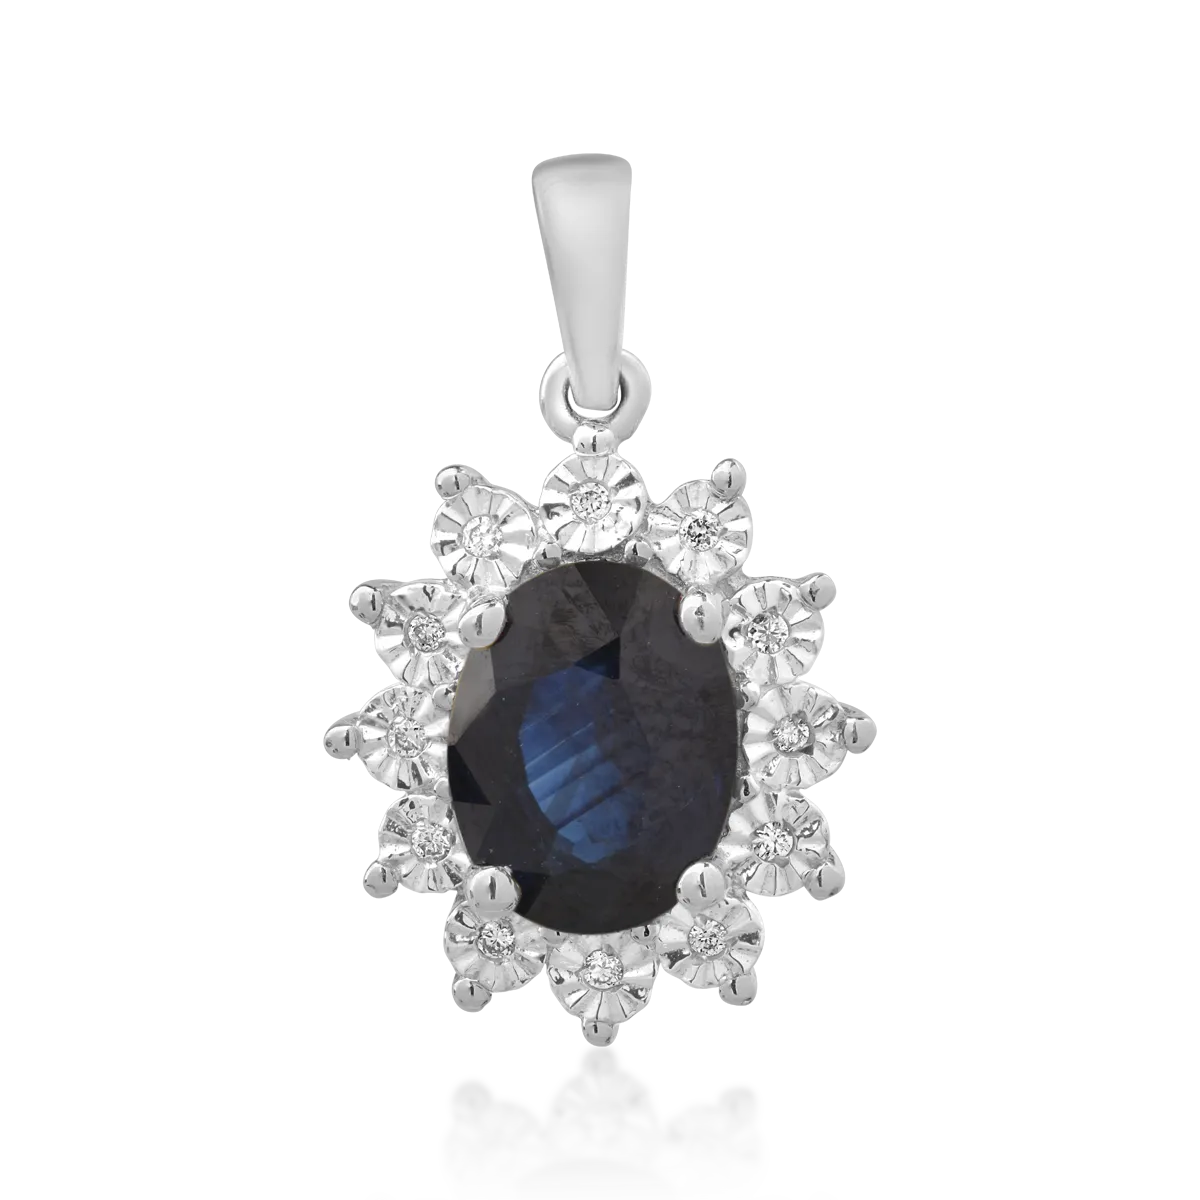 14K white gold pendant with 1.5ct sapphire and 0.04ct diamonds